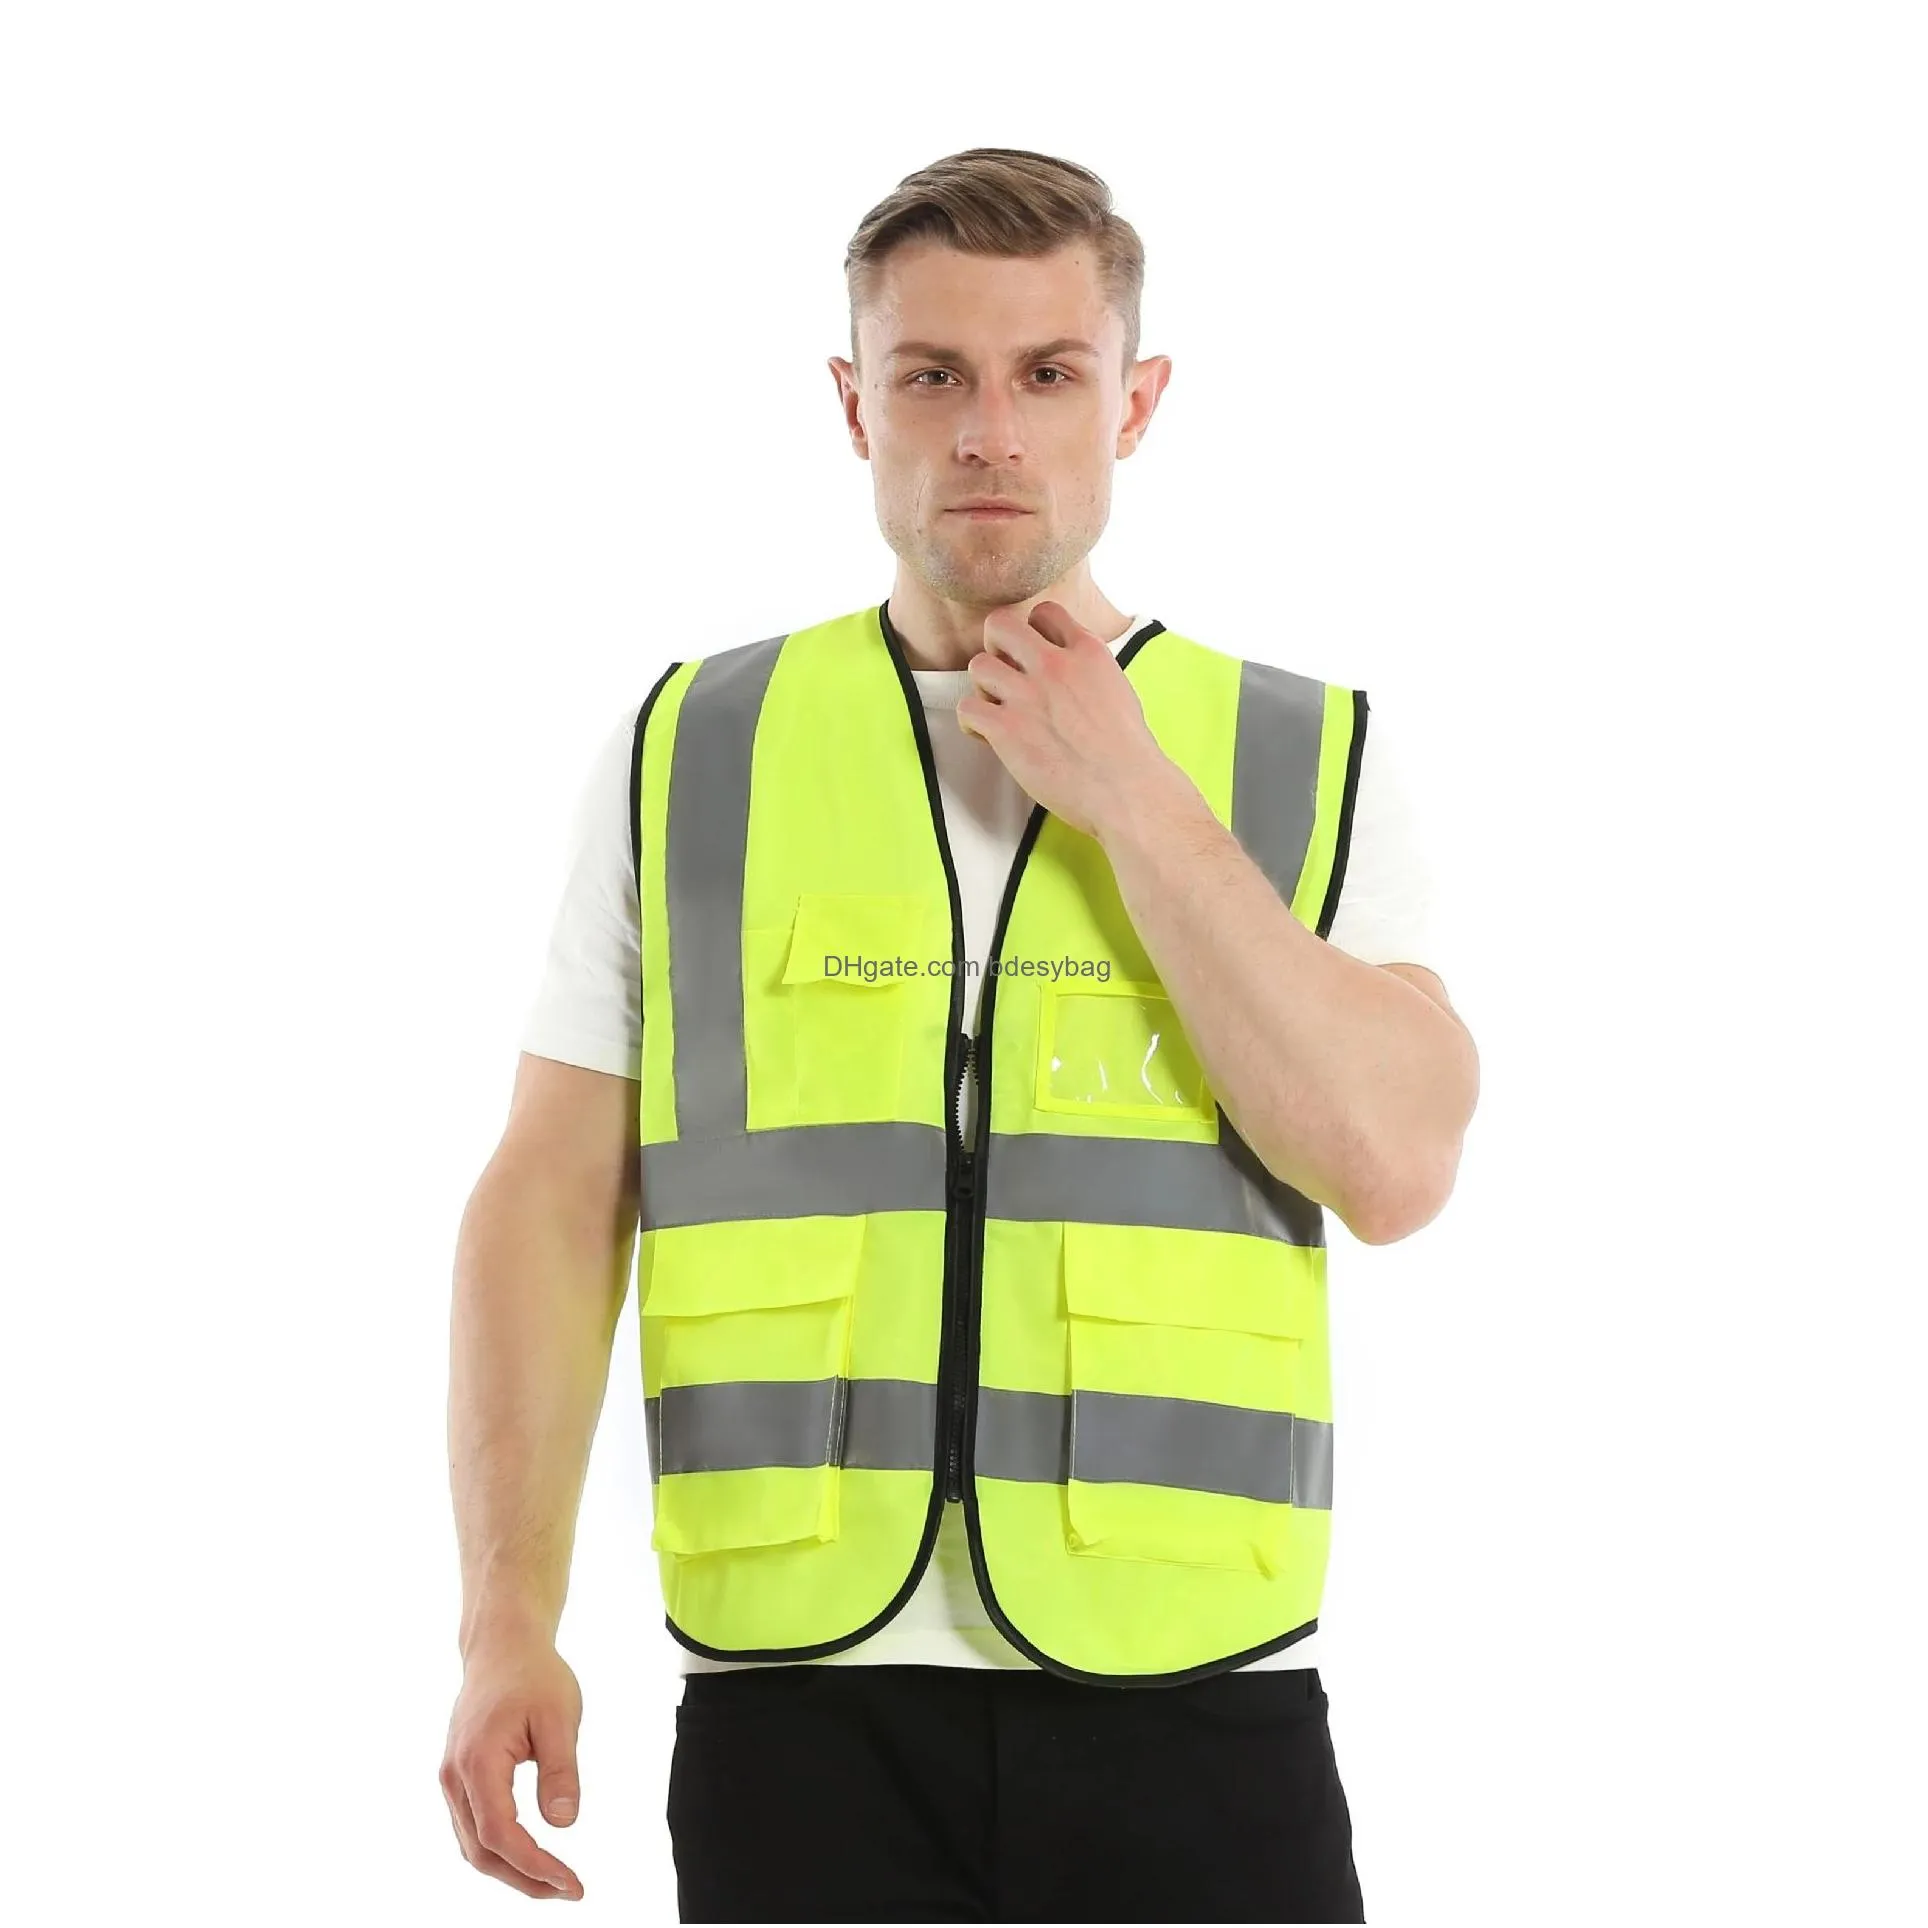 construction reflective traffic road working jackets safety vest with pockets racing running sports